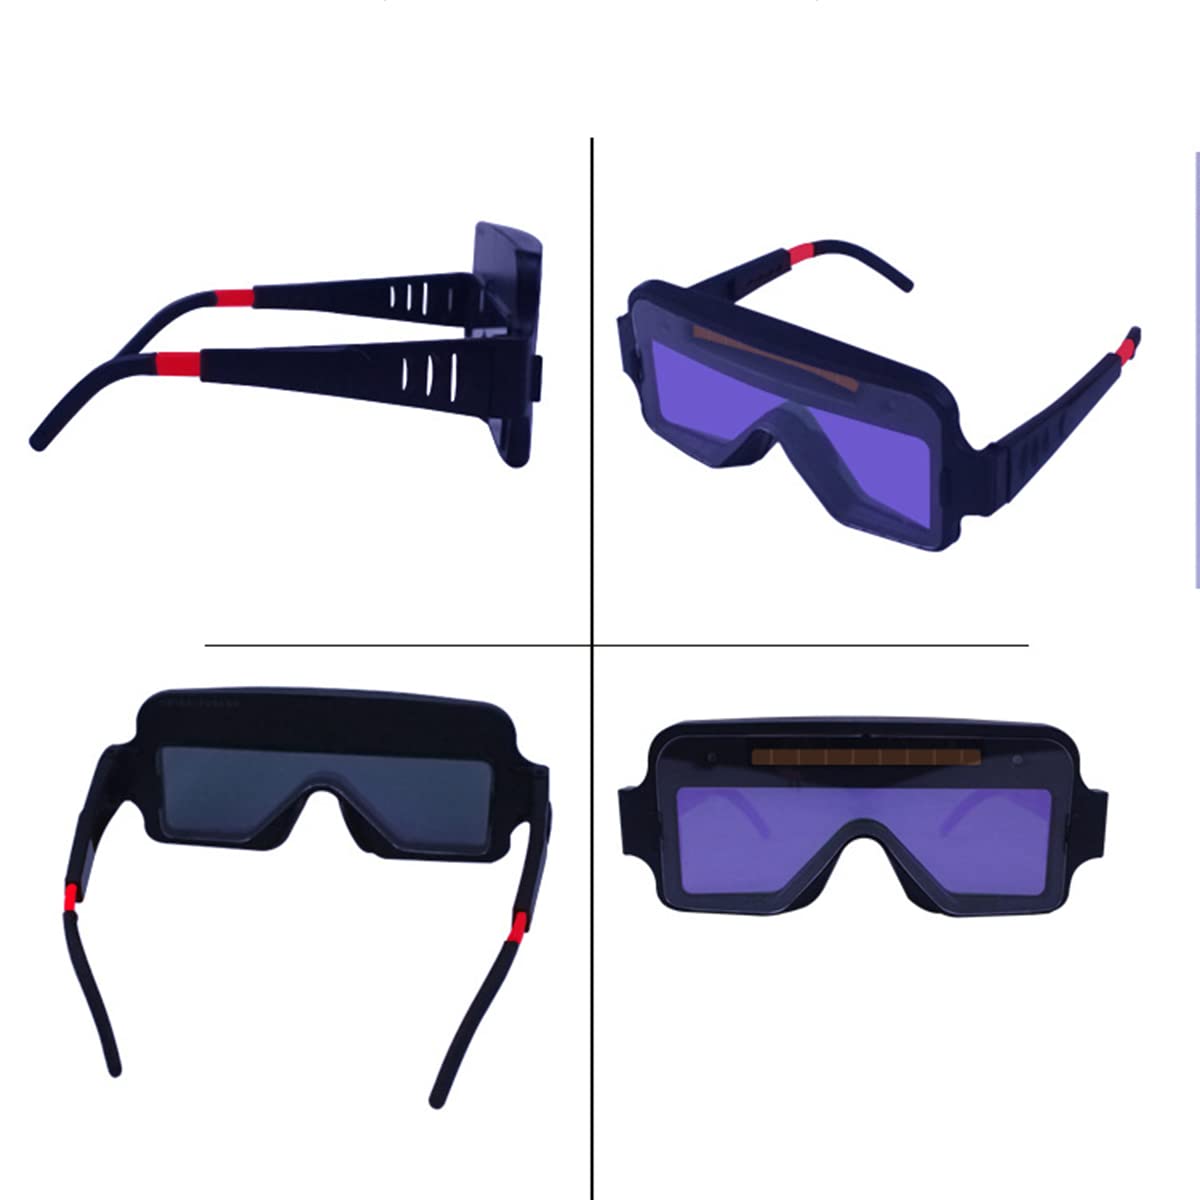 Welding Goggles, Automatic Darkening Dimming Welding Glasses Anti-glare Argon Arc Welding Glasses Welder Eye Protection Special Goggles Tools